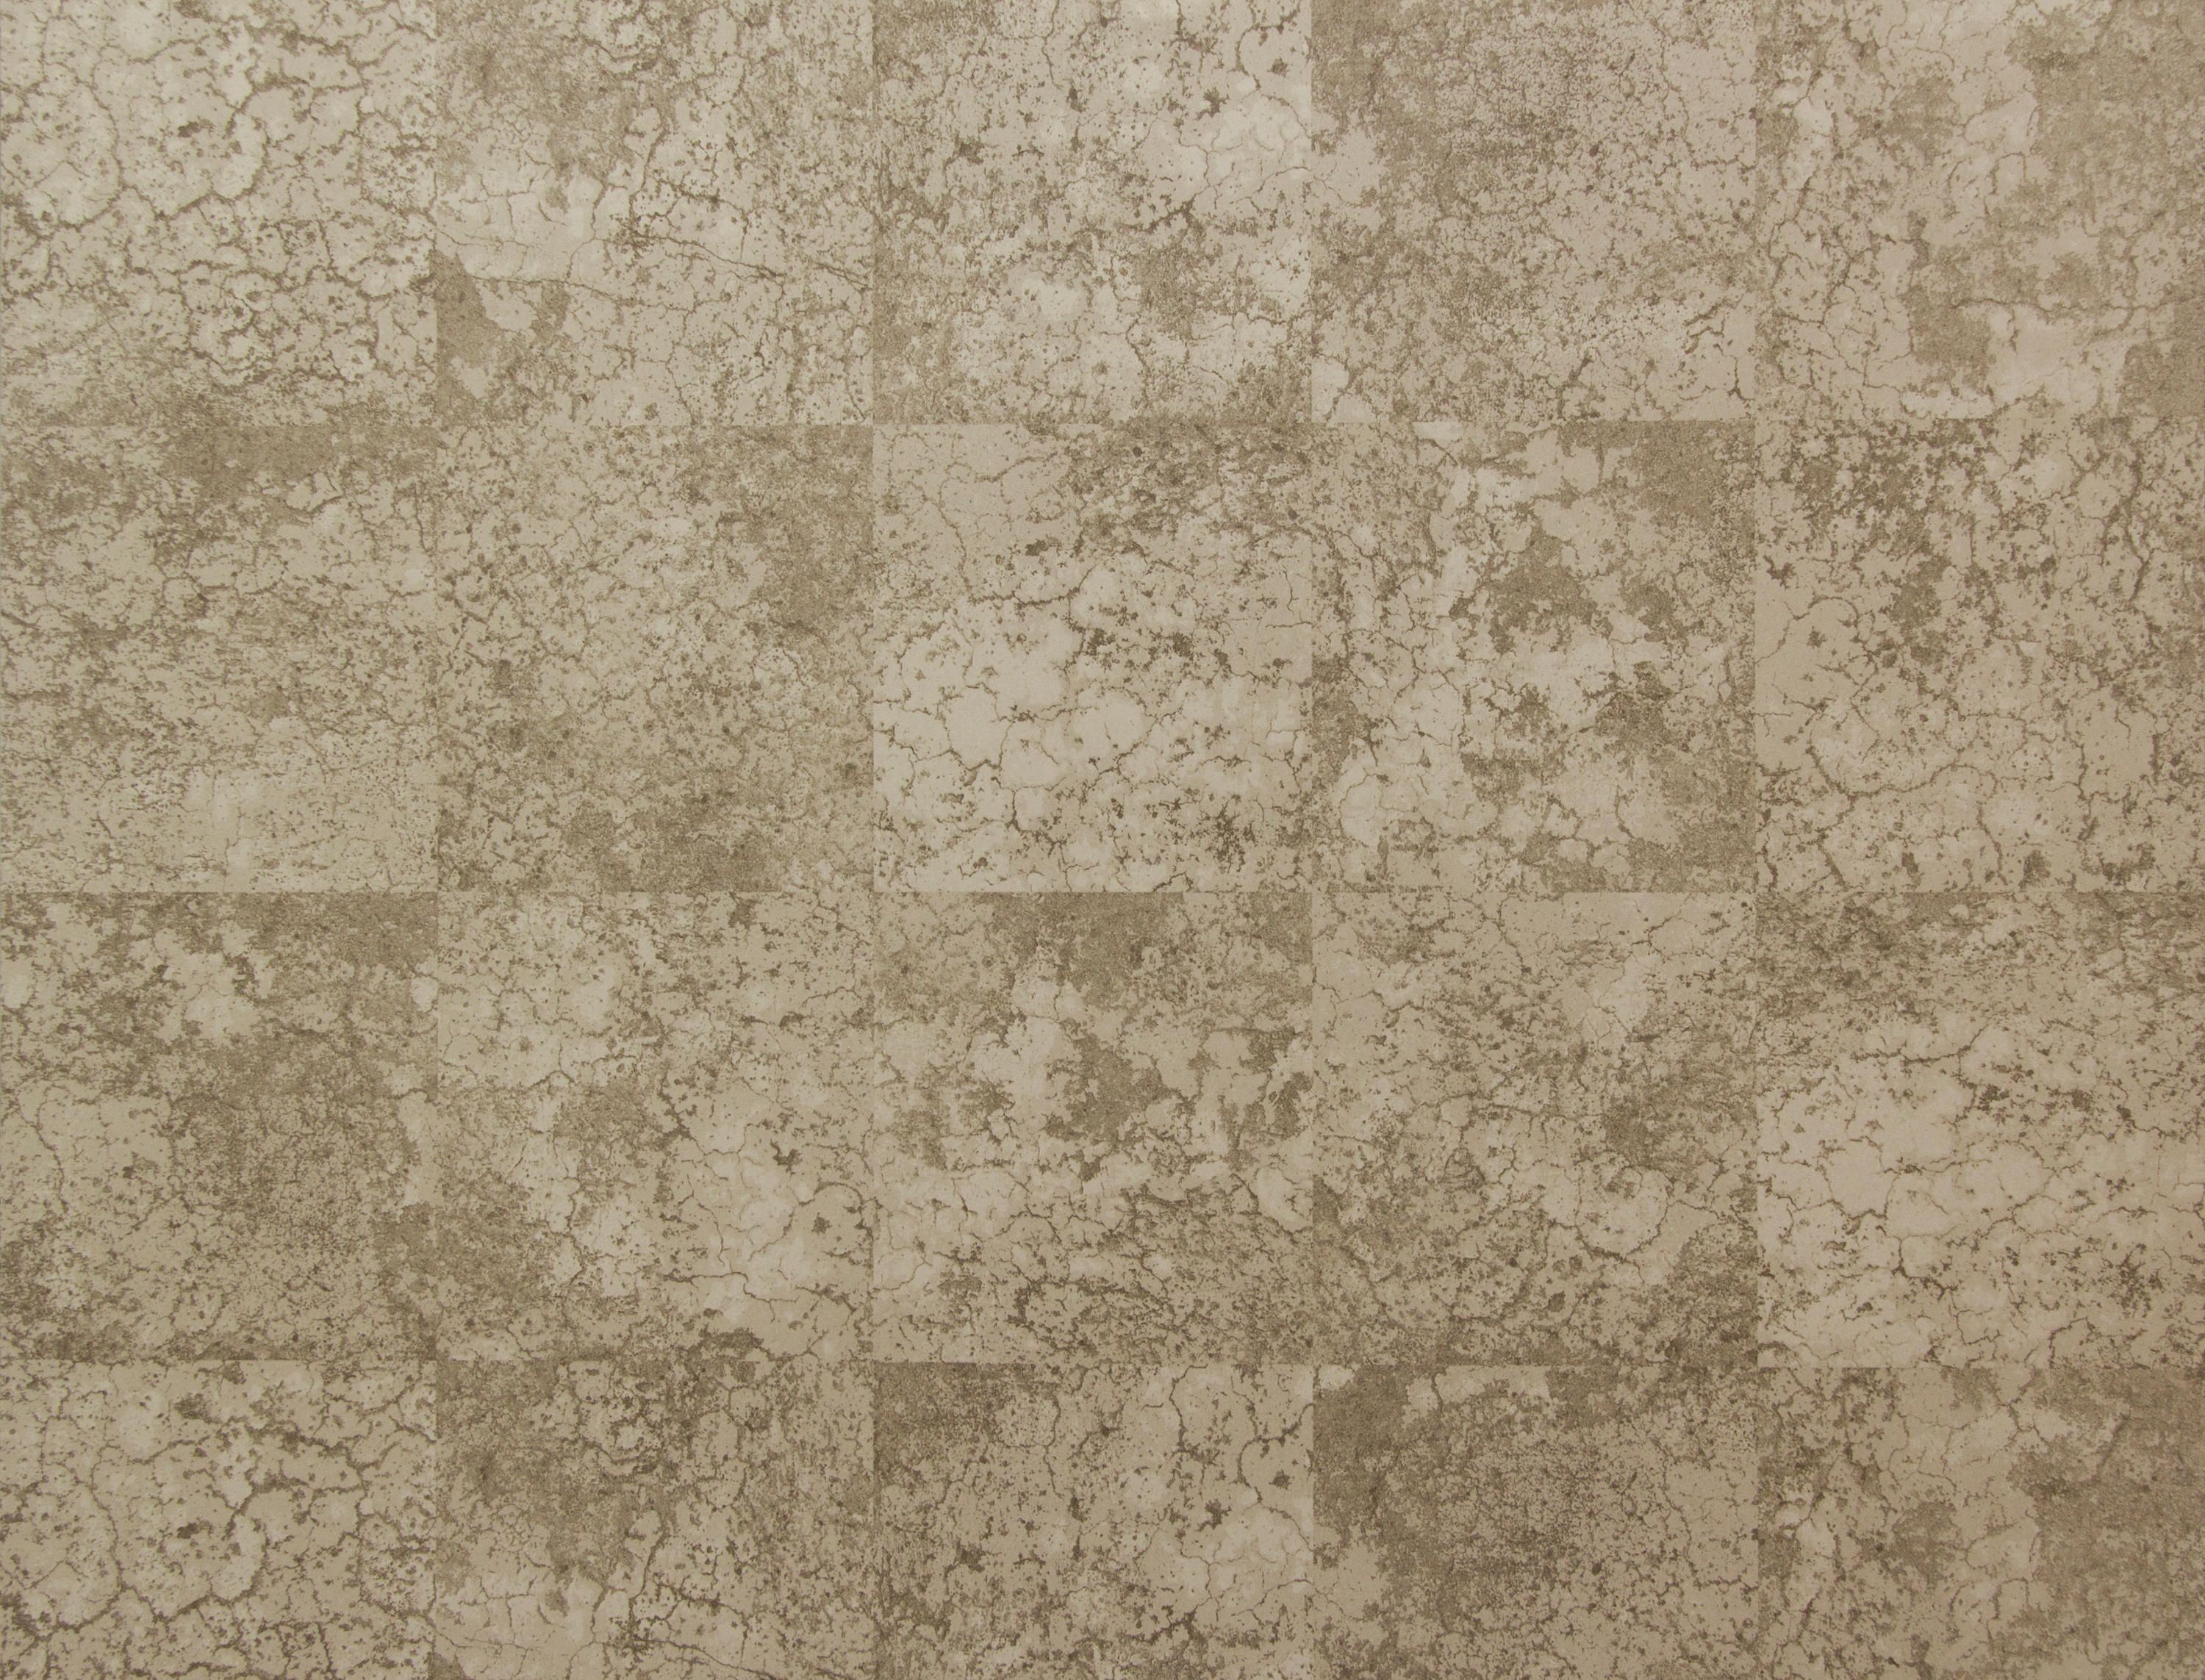 ETERNITY TILE ET201 coverings / wallpaper from Omexco